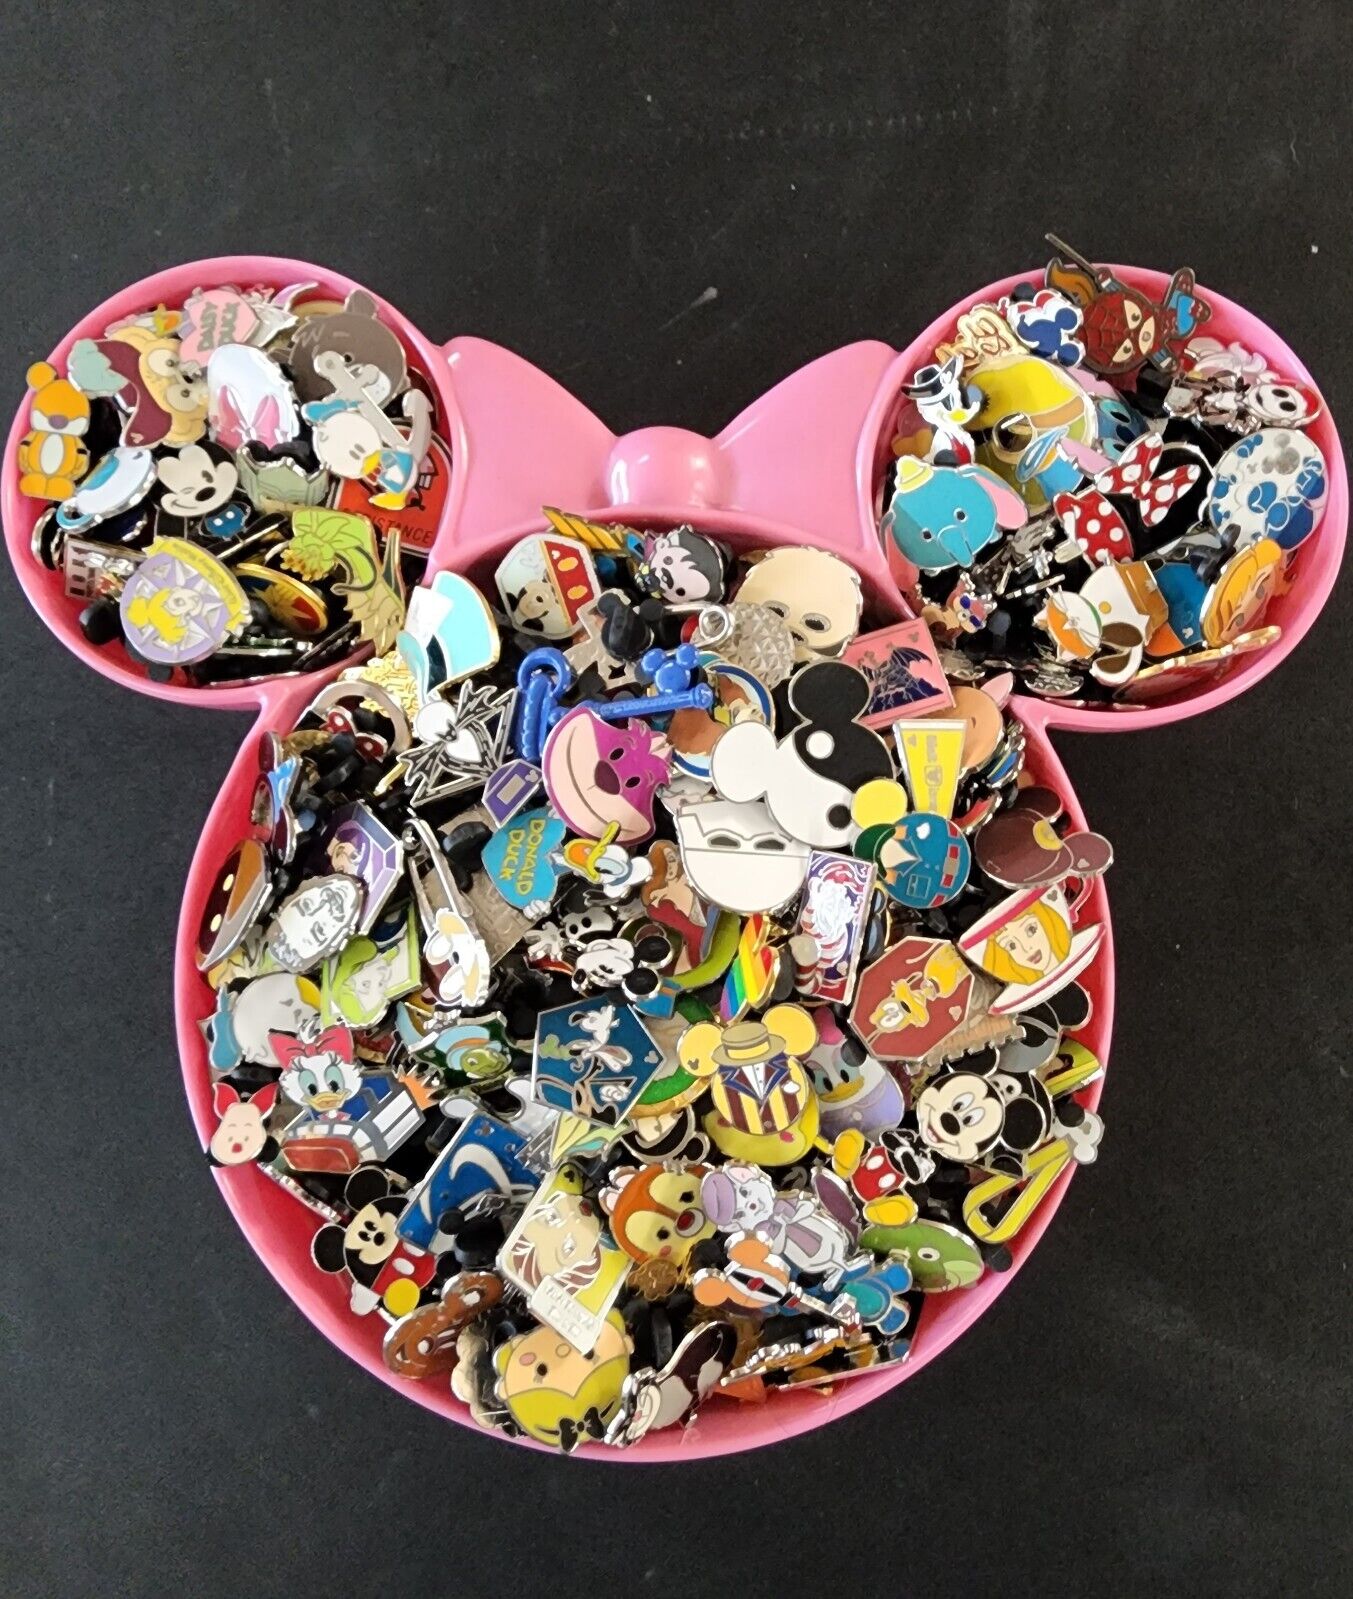 DISNEY PIN TRADING LOT 200, NO DOUBLES, FREE PRIORITY SHIPPING, TRADEABLE